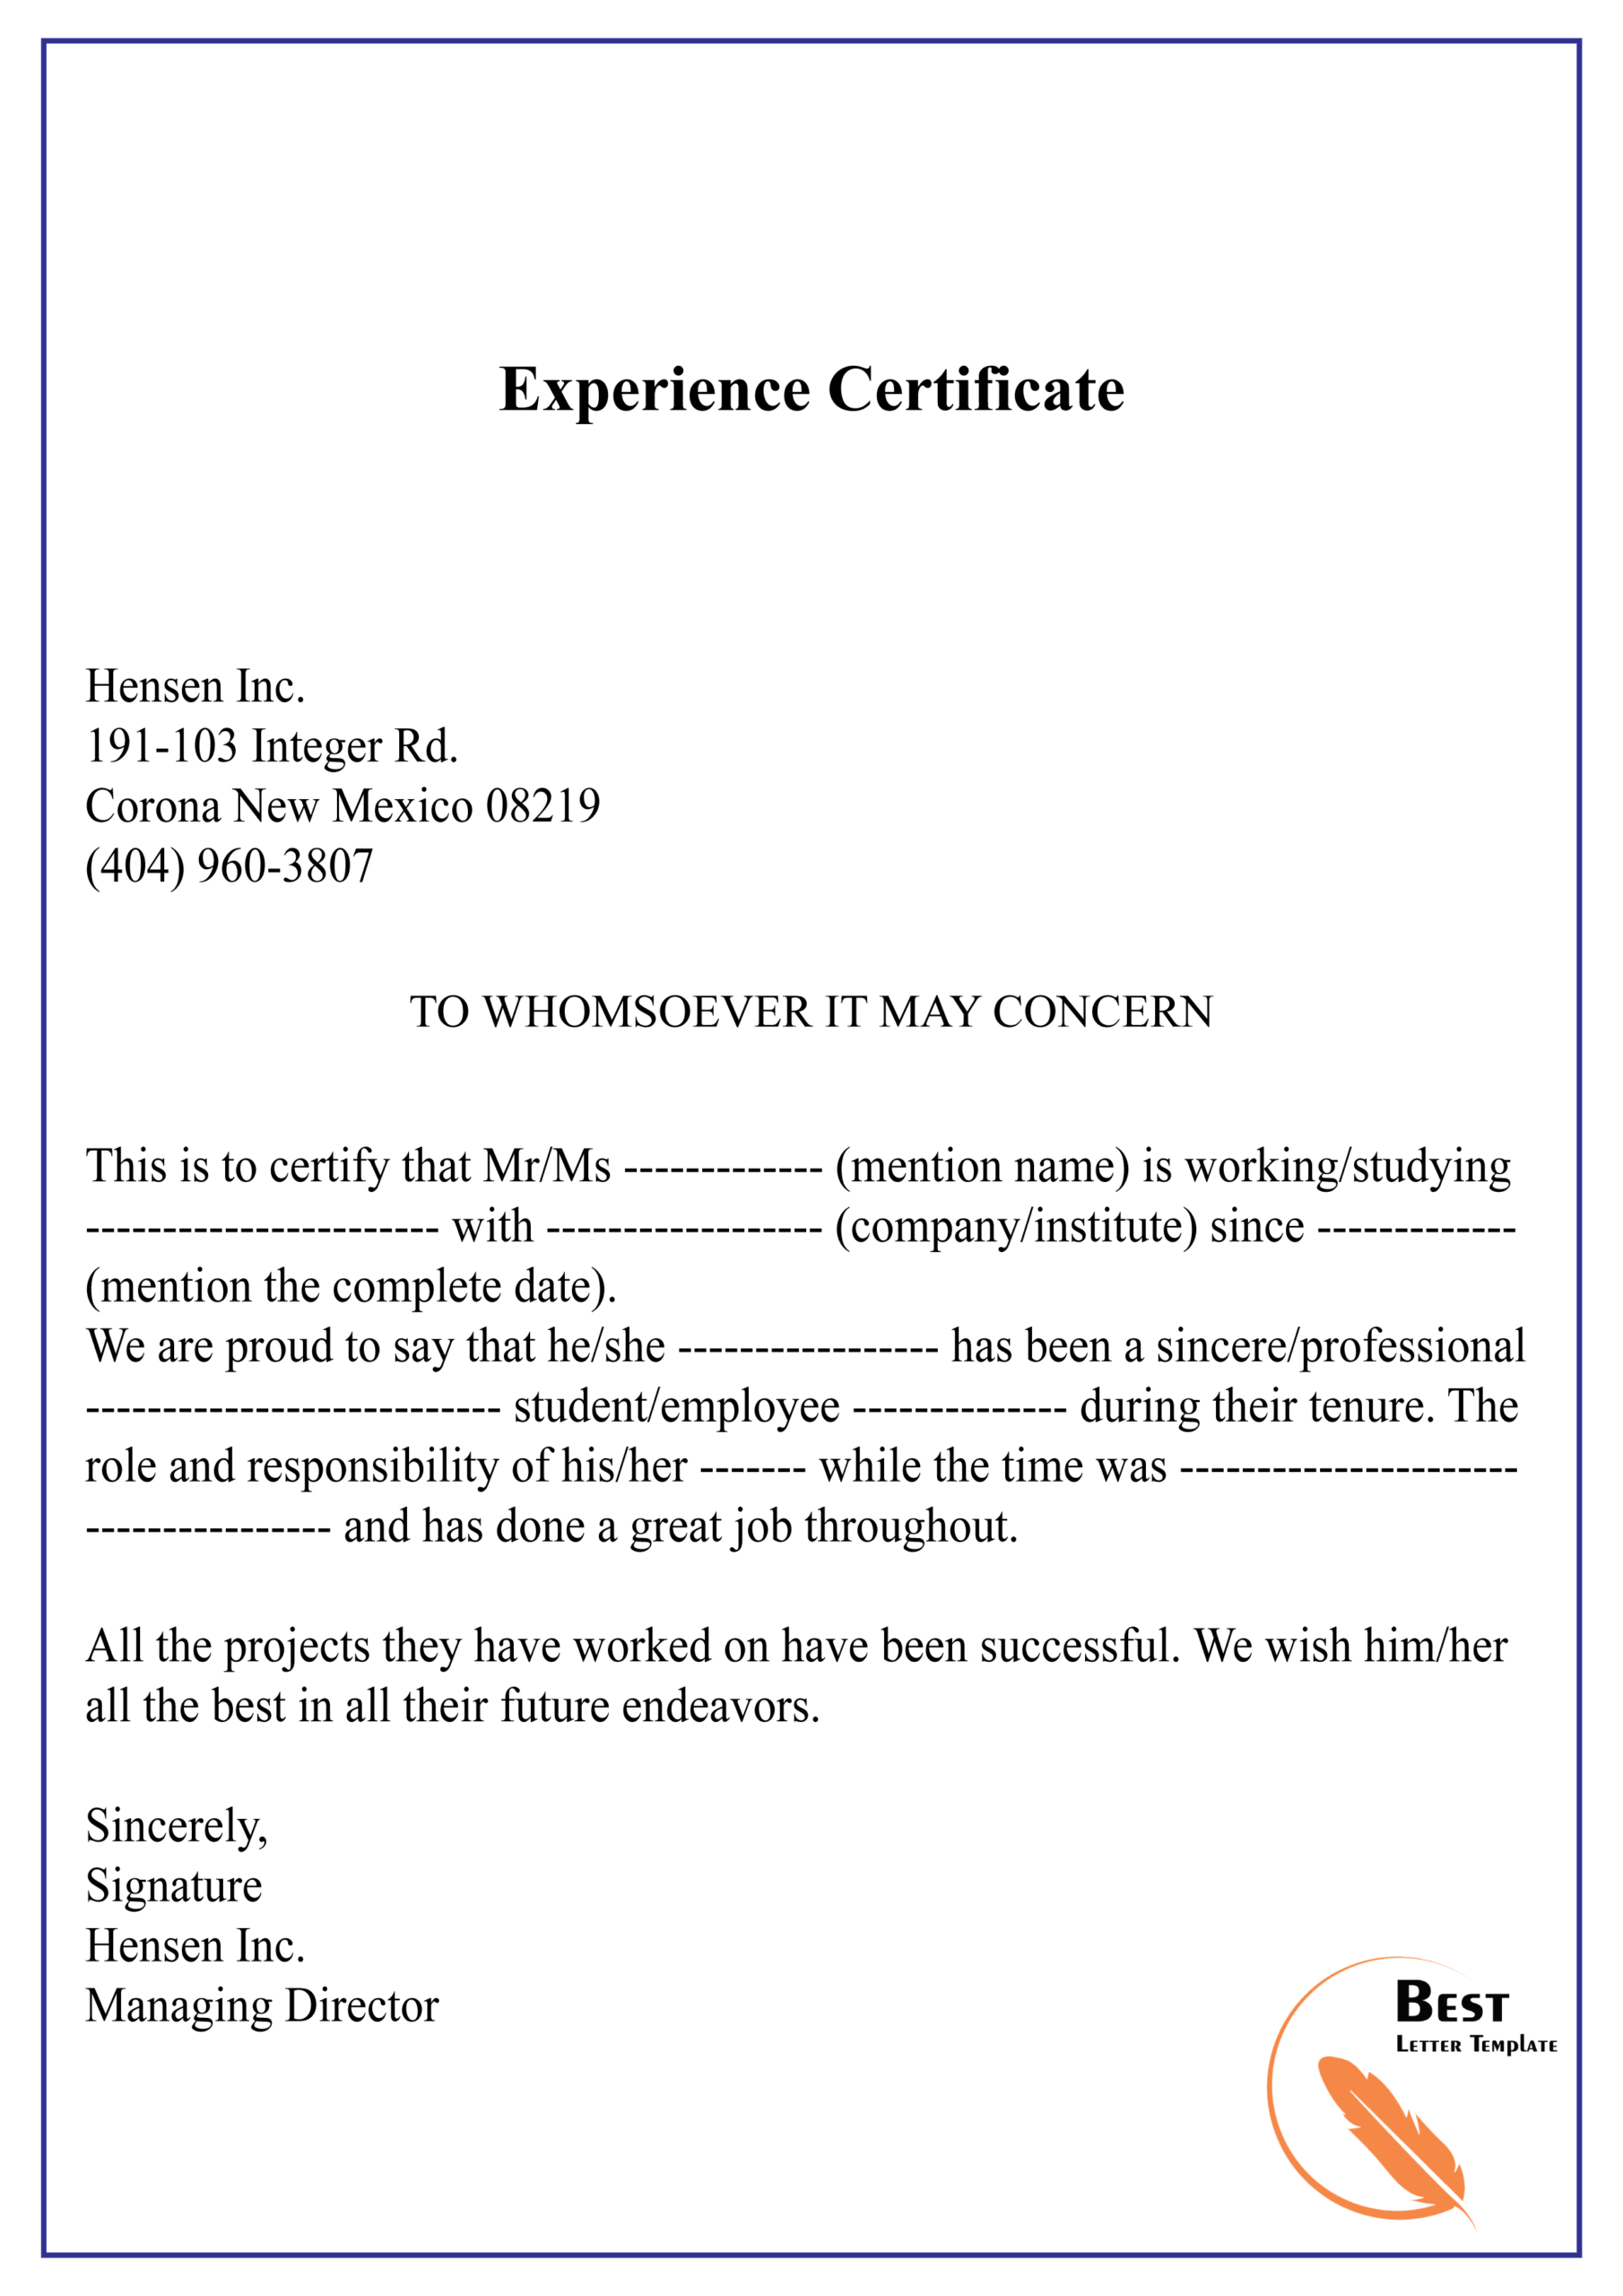 Experience Certificate 01 | Best Letter Template For Certificate Of Experience Template